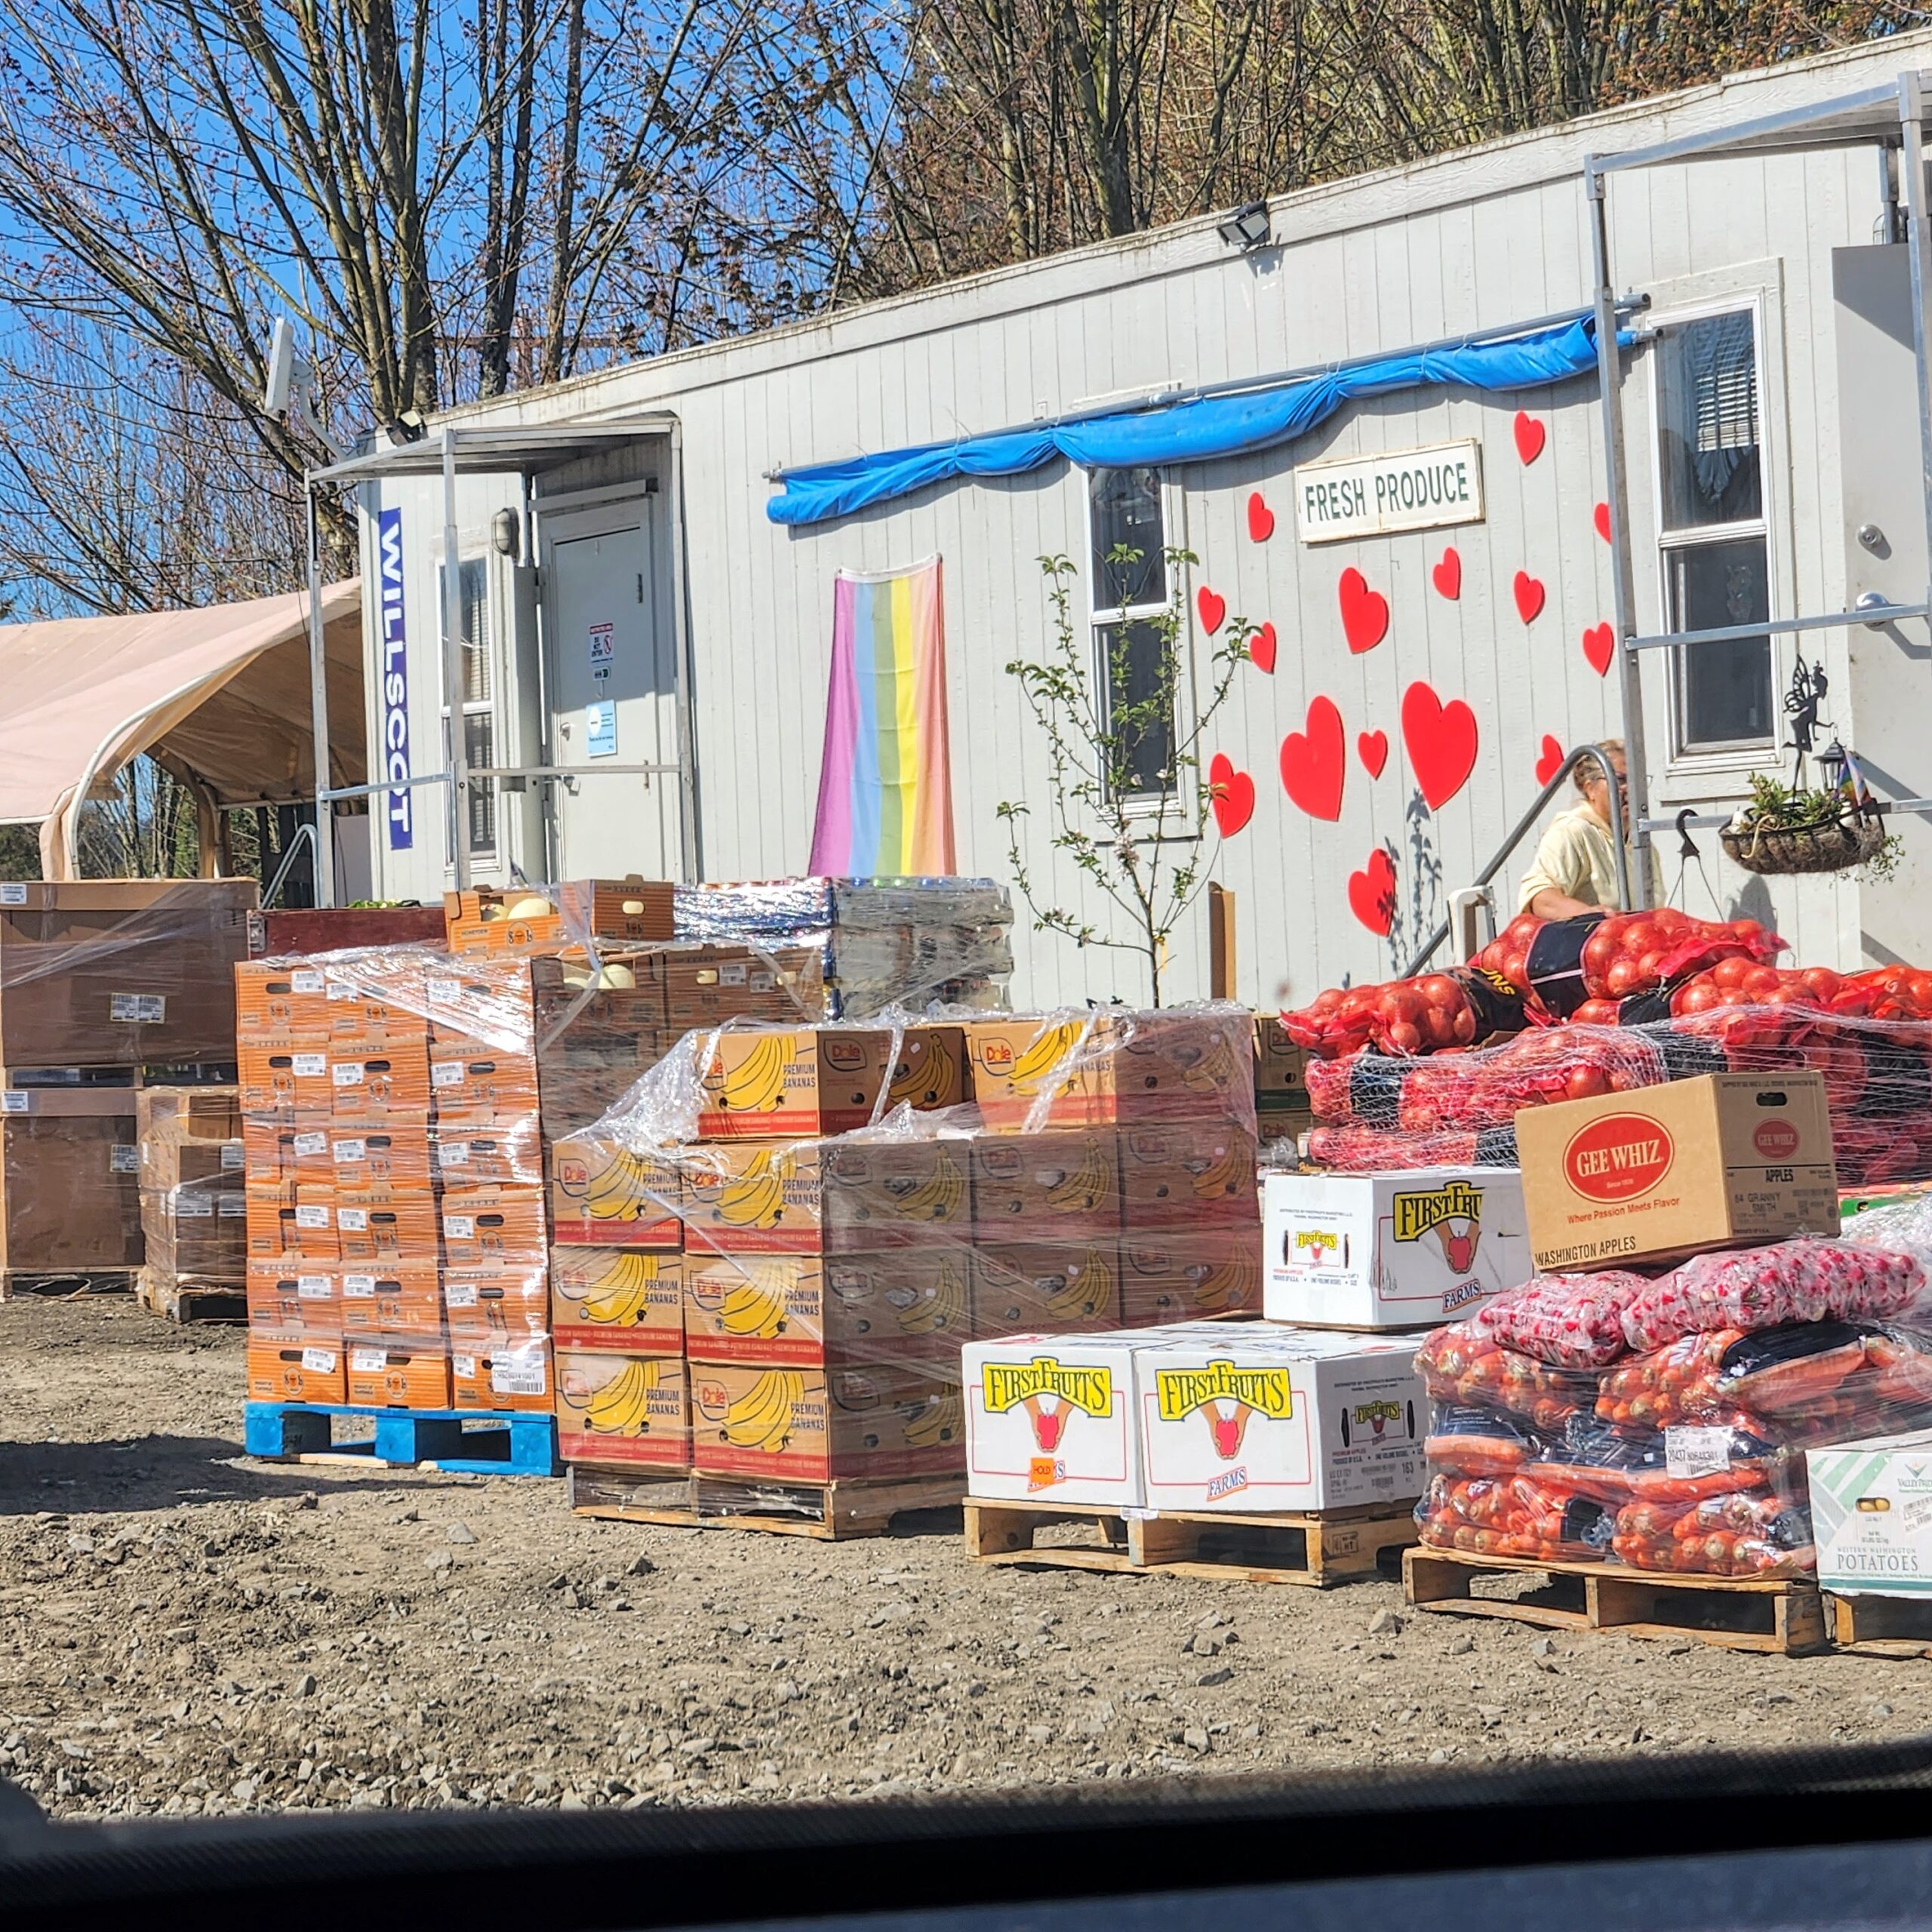 A food distribution center with several pallets of boxed fresh produce, including potatoes and onions, in front of a gray mobile office trailer decorated with a "Fresh Produce" sign and hearts. A rainbow flag hangs to the left of the door, and a person is visible behind the produce. The setting appears sunny and outdoors.